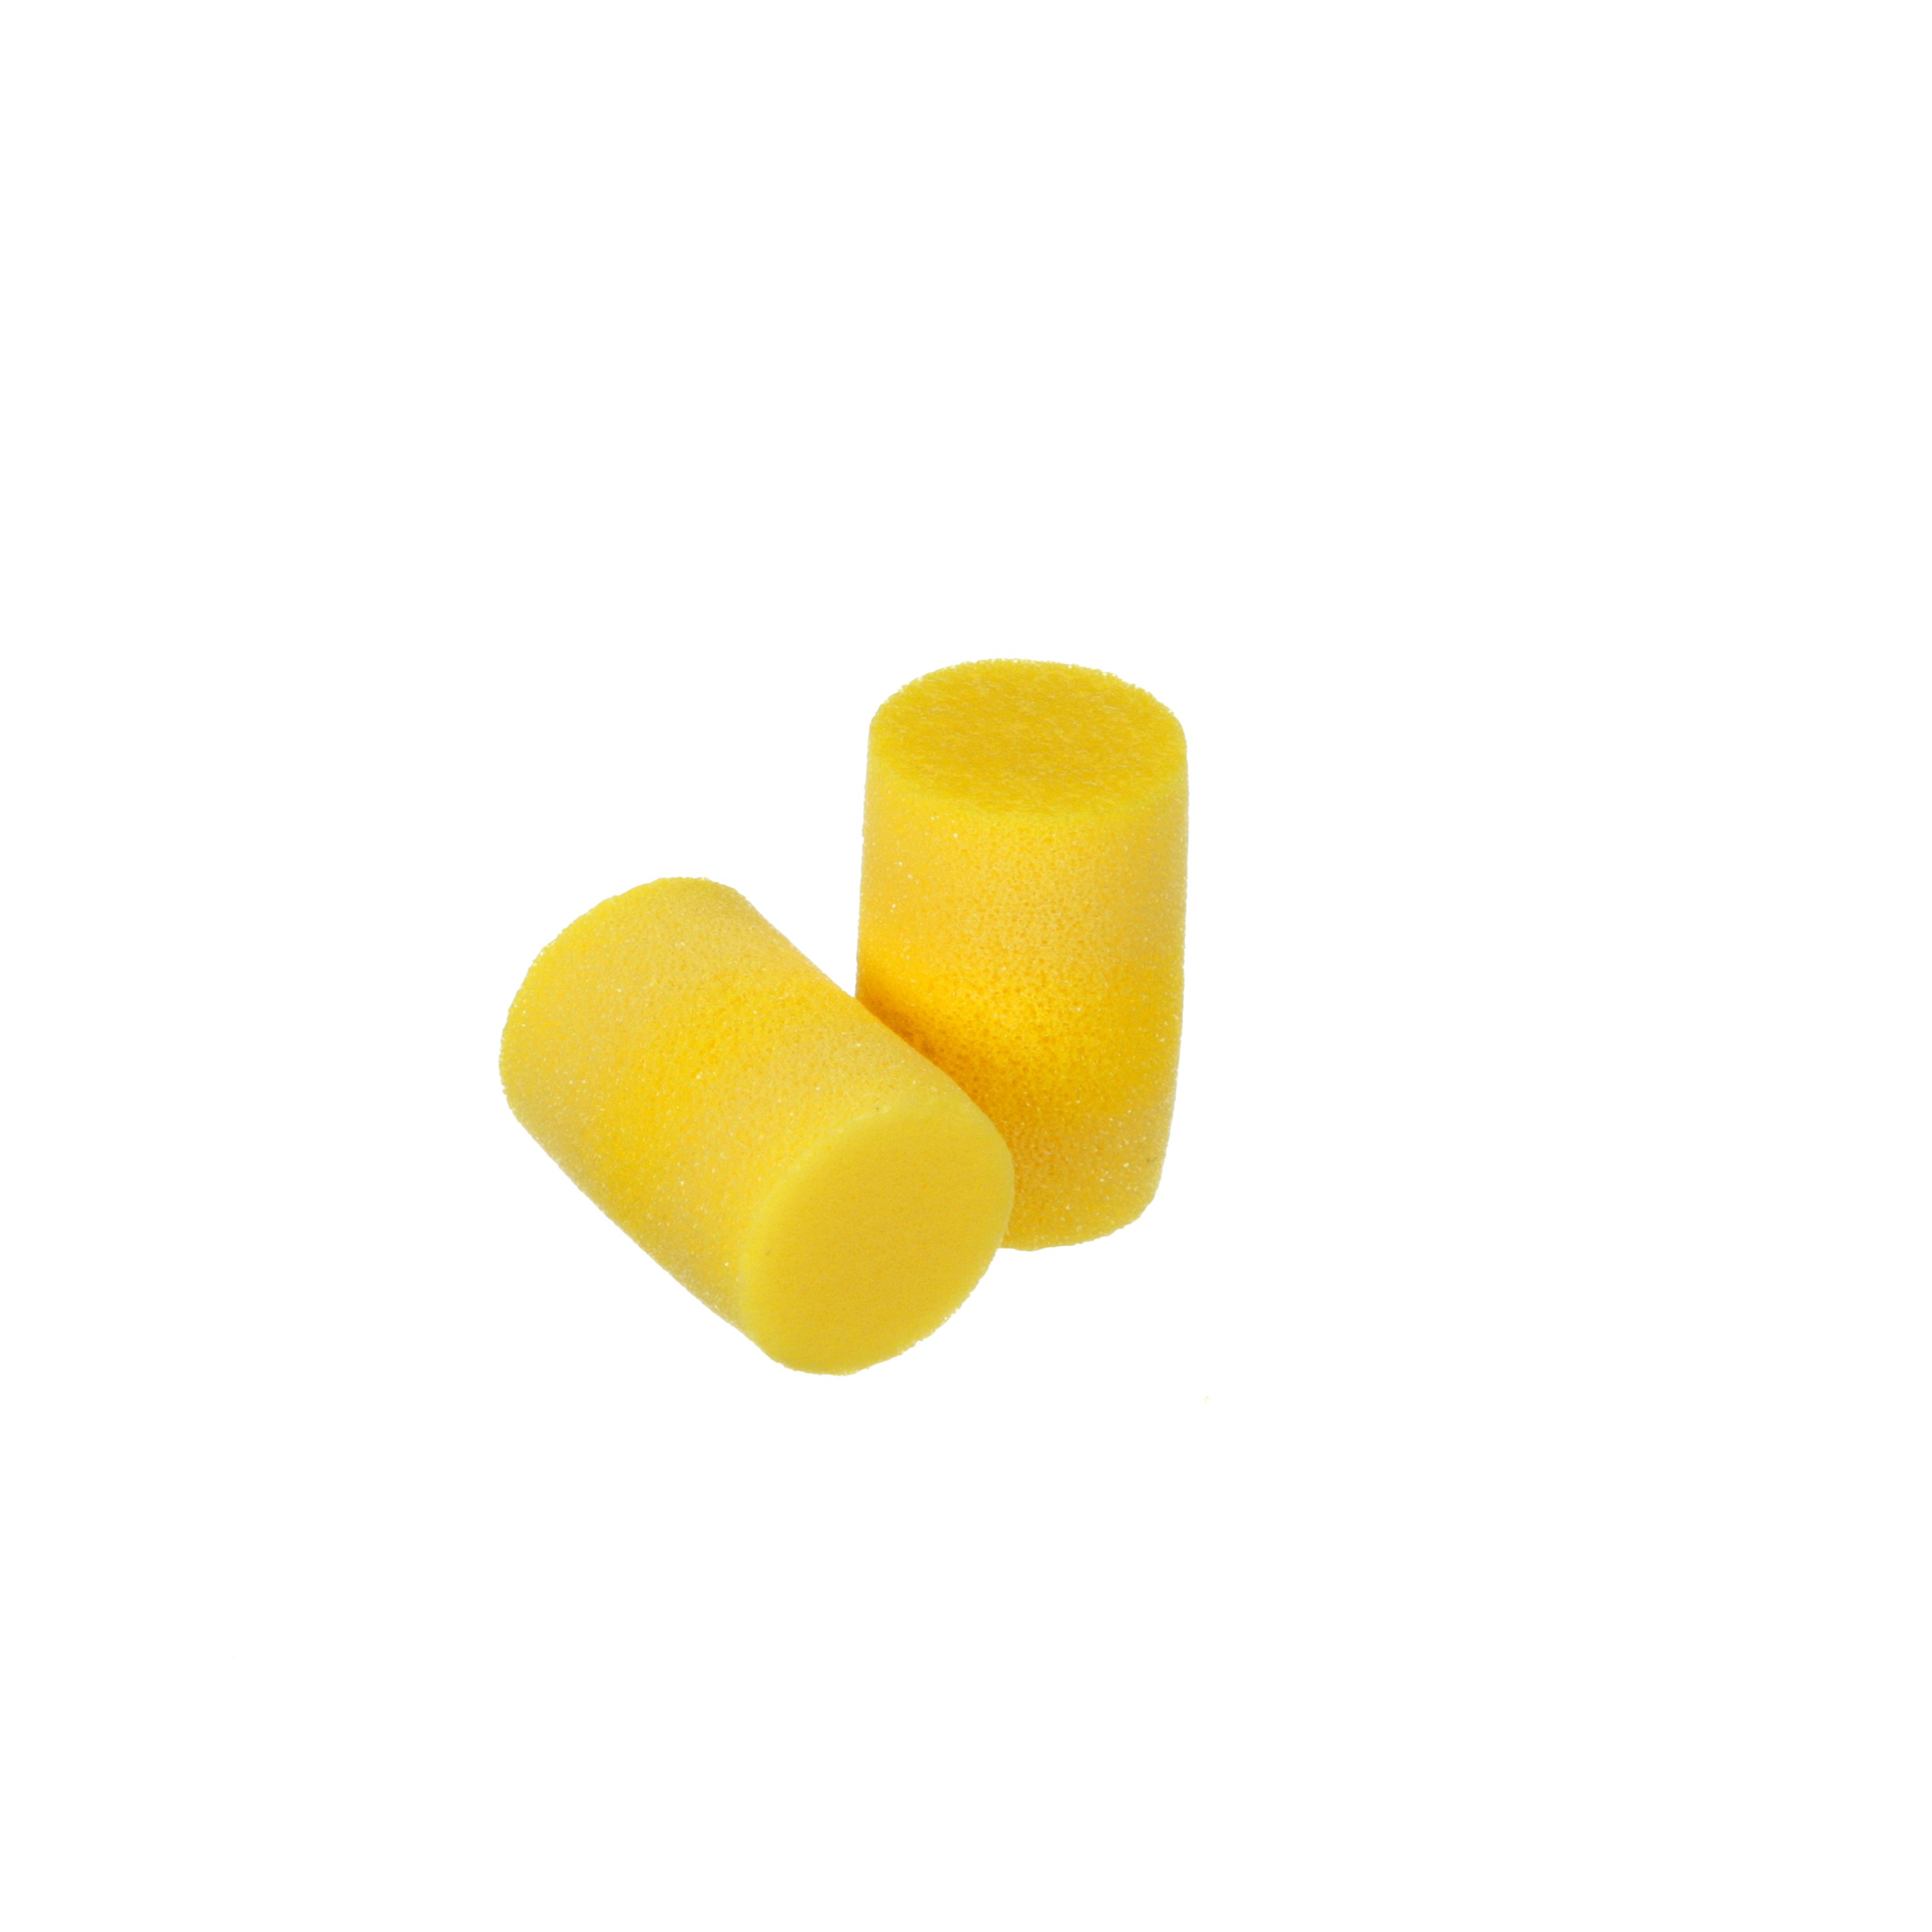 E-A-R™ UltraFit™ 340-4004 Earplugs, 25 dB Noise Reduction, Flanged Shape, ANSI S3.19-1974, Reusable, Corded Design